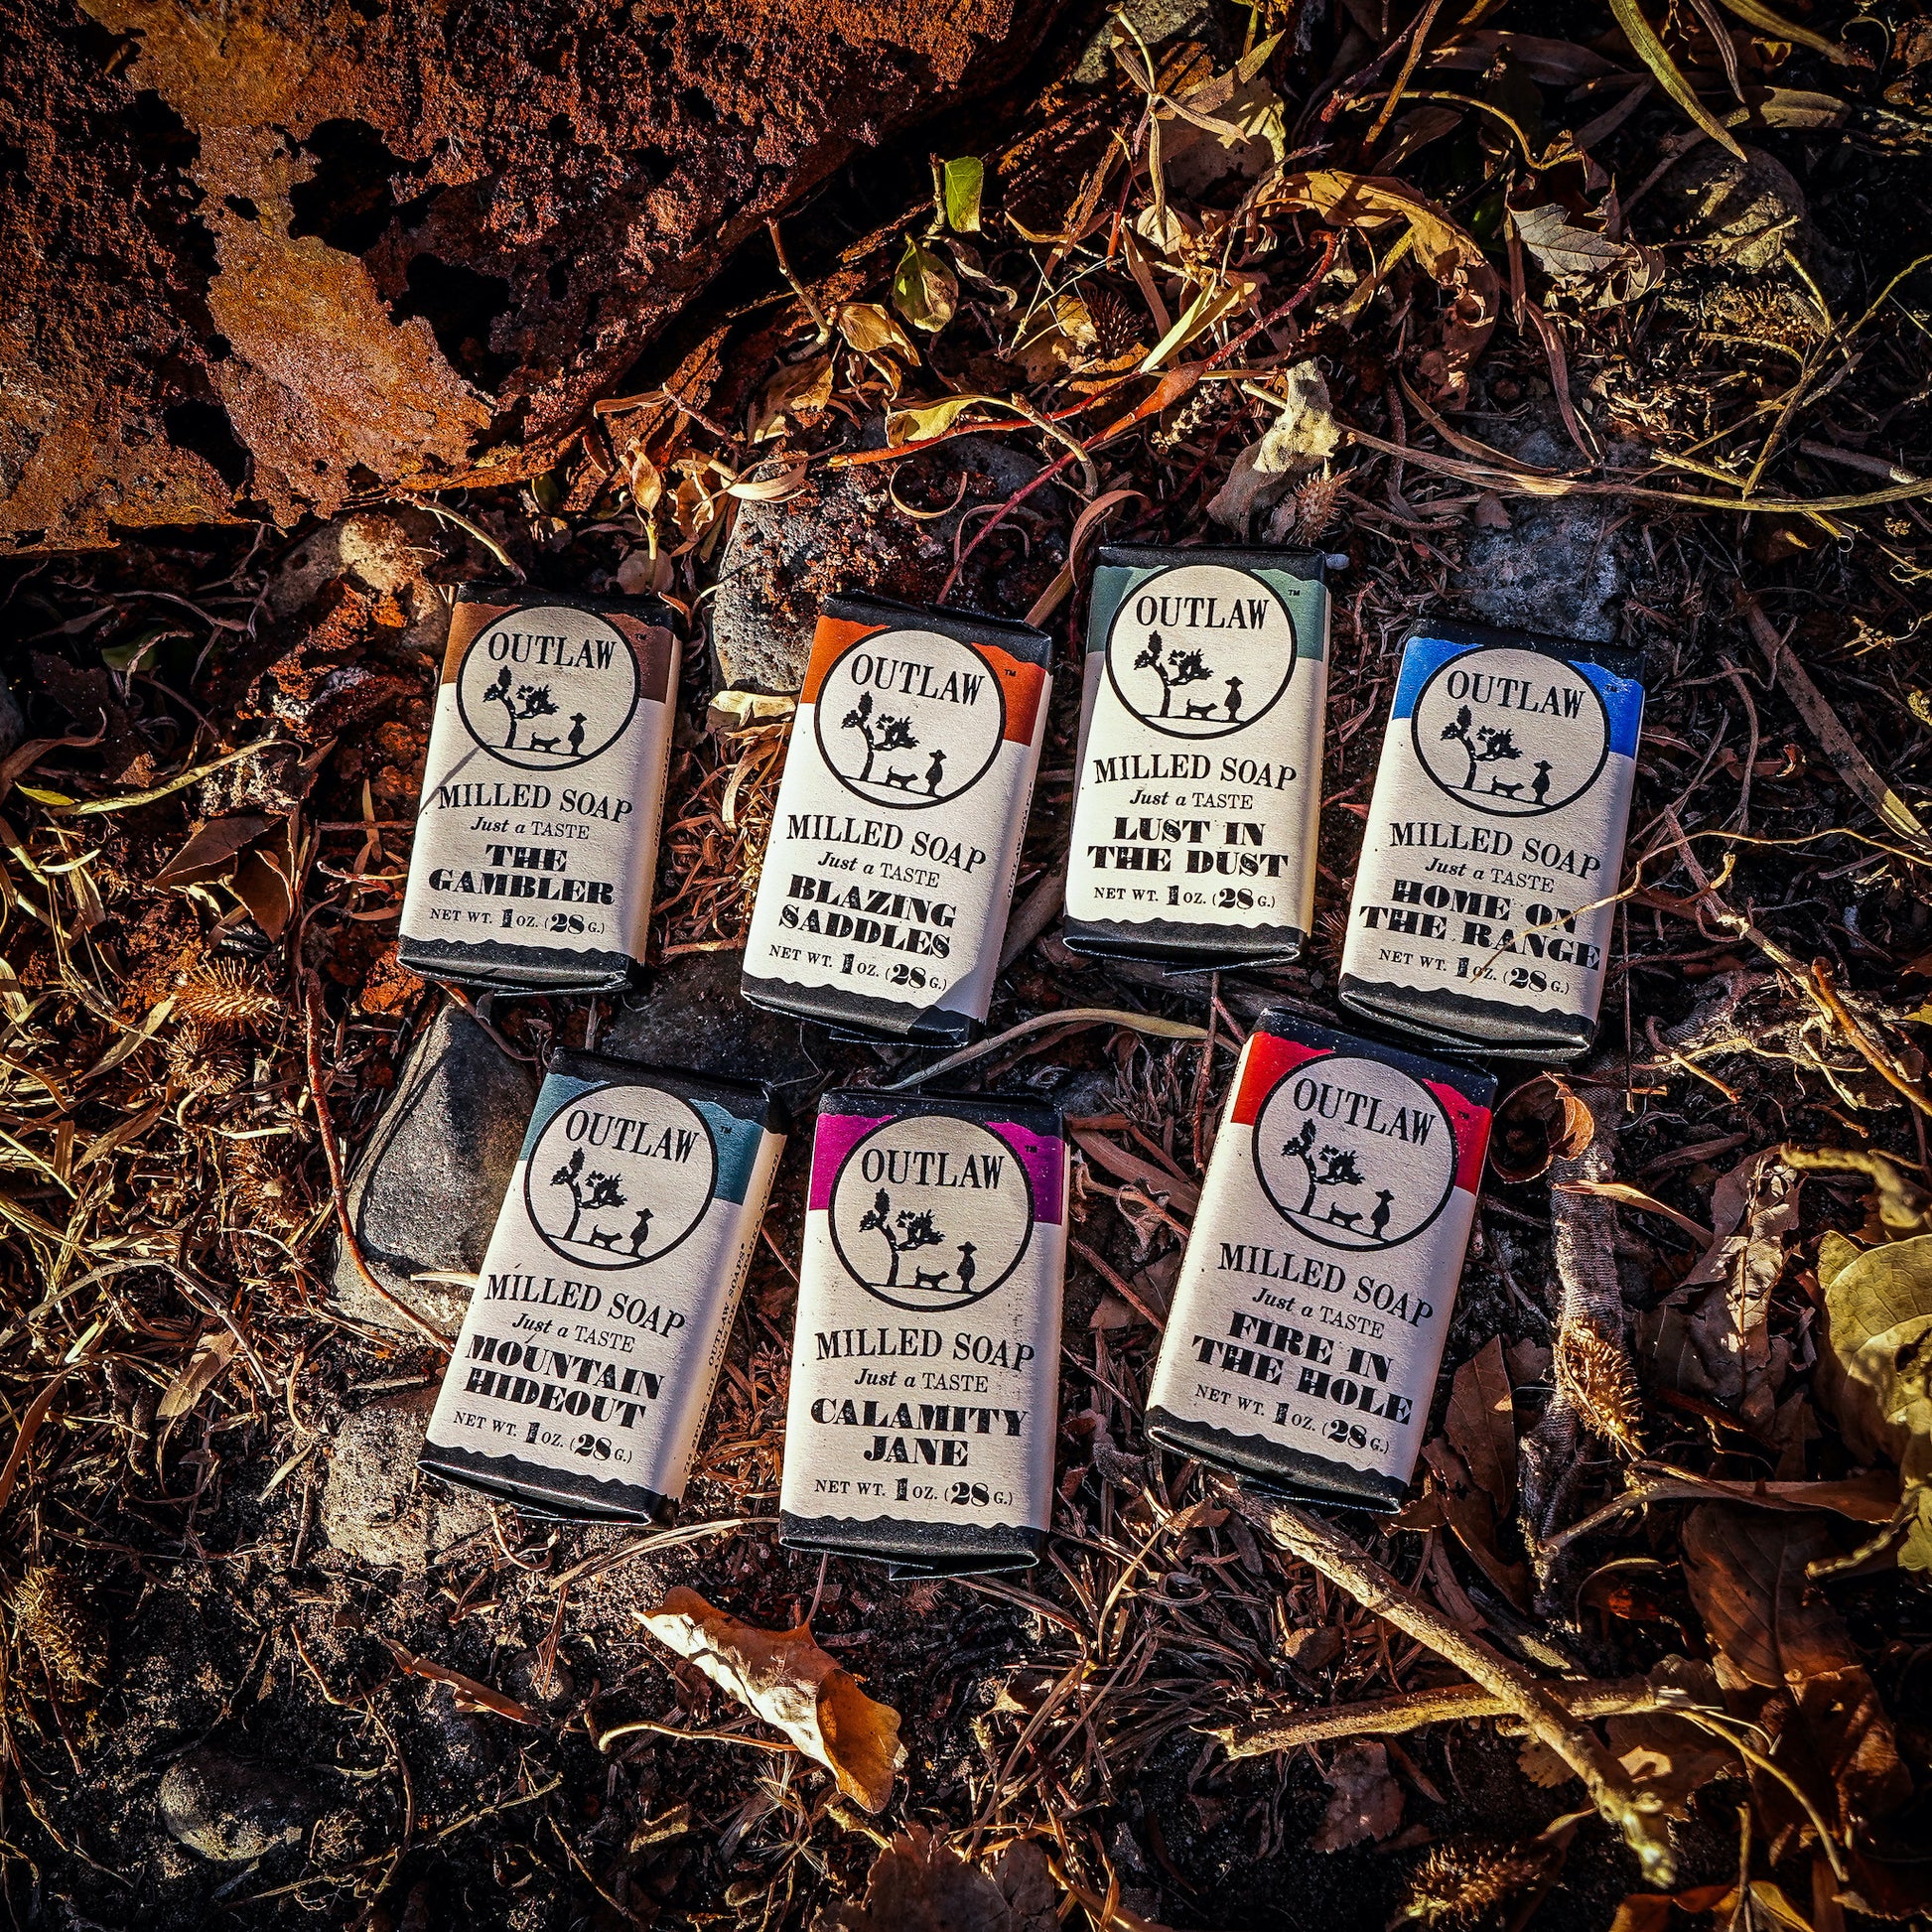 Outlaw milled bar soap variety pack